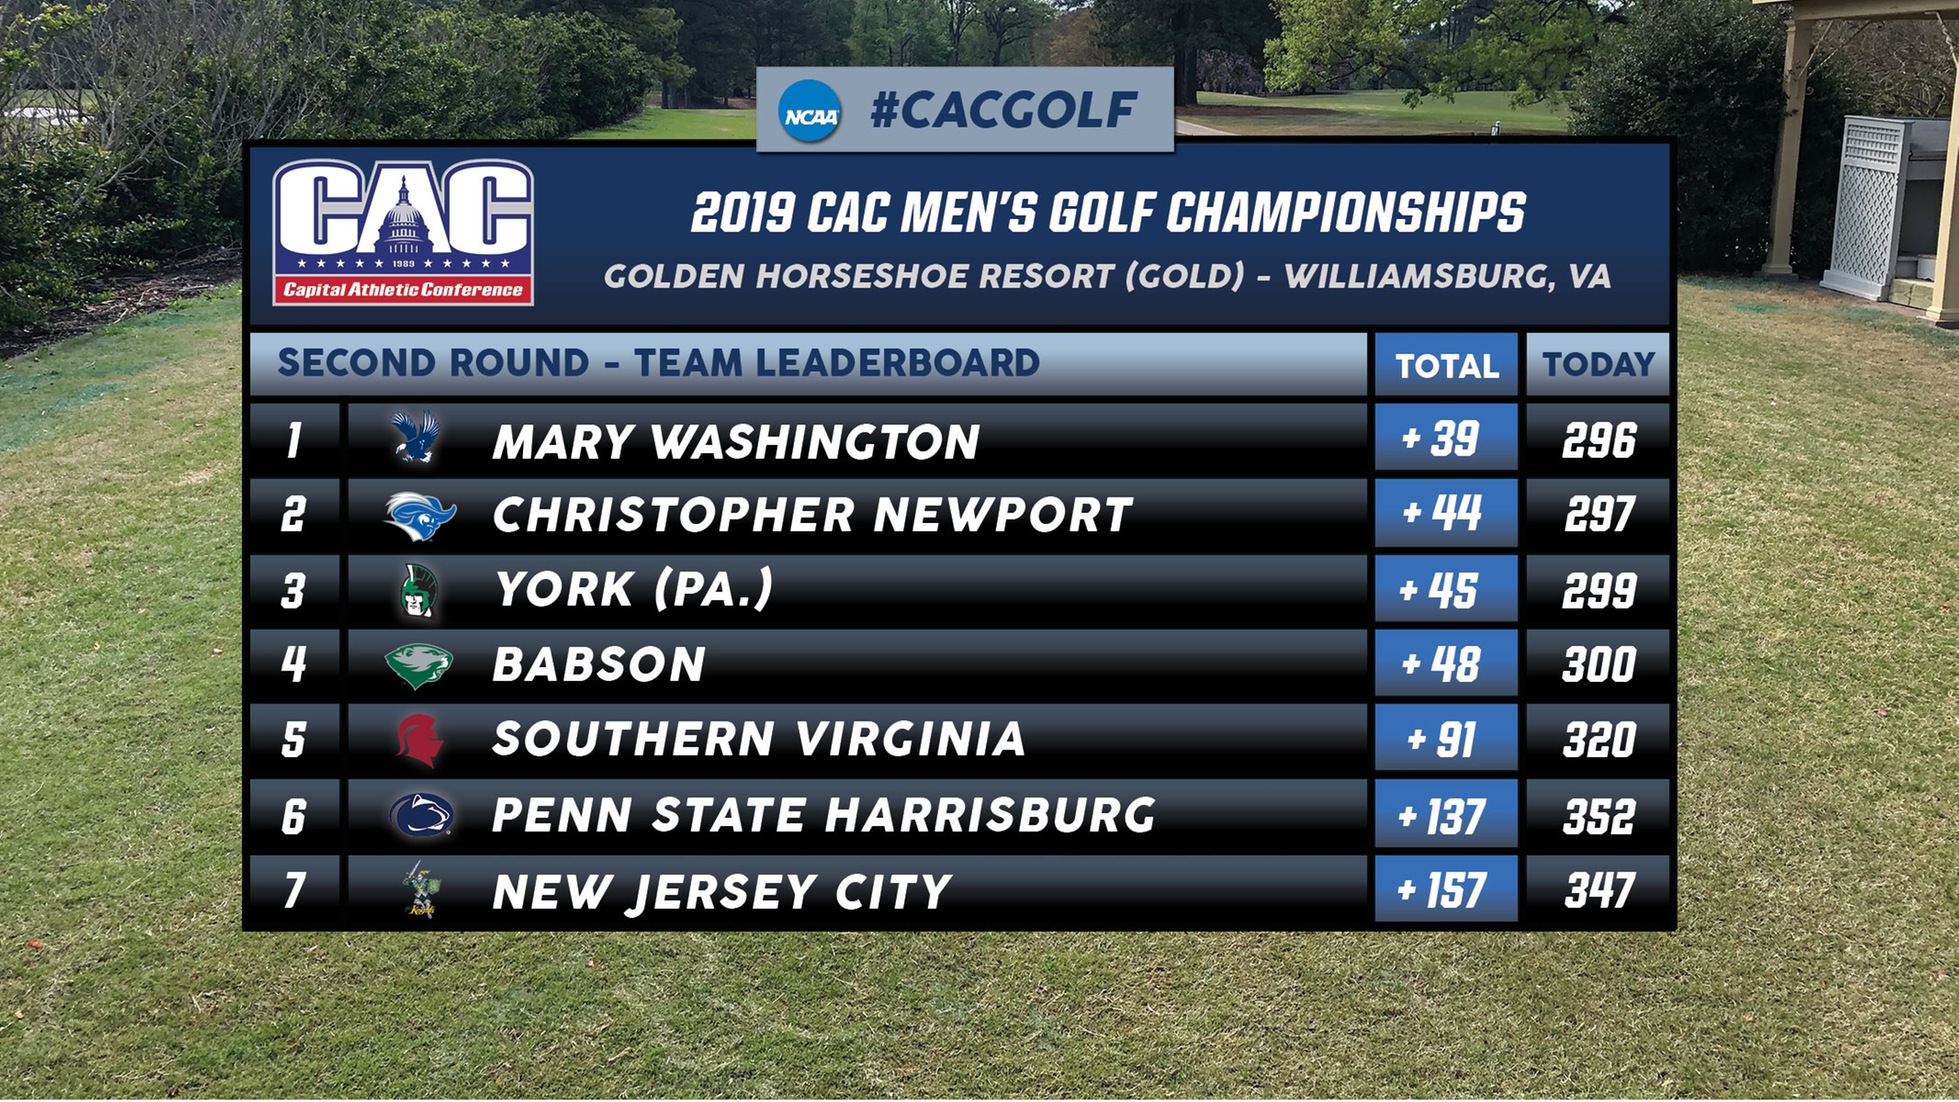 Mary Washington Remains Atop Crowded 2019 CAC Men's Golf Championship Leaderboard